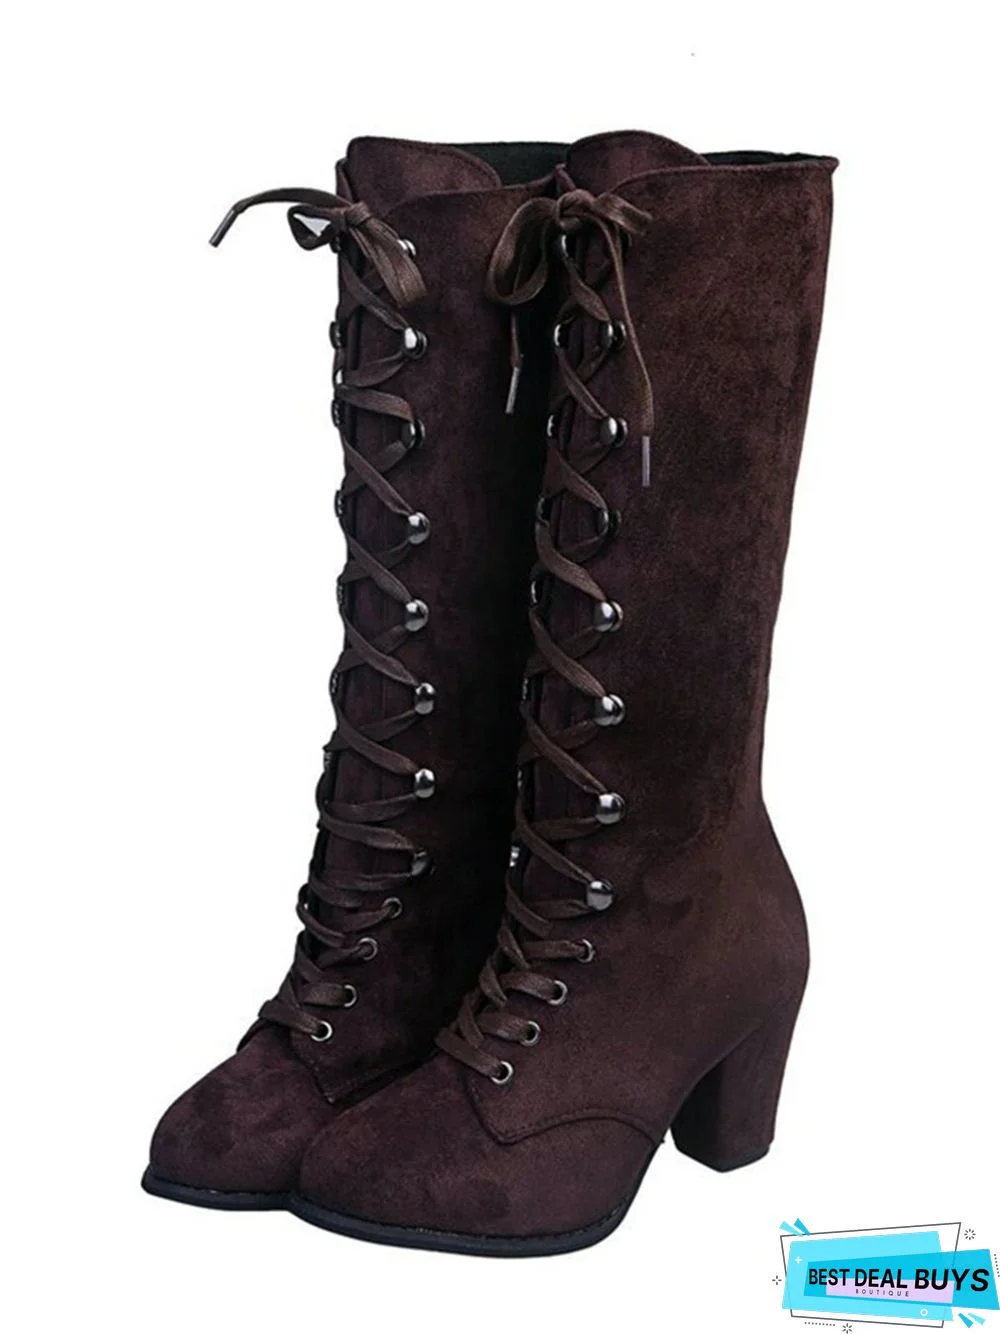 Simple Suede Martin Combat Boots